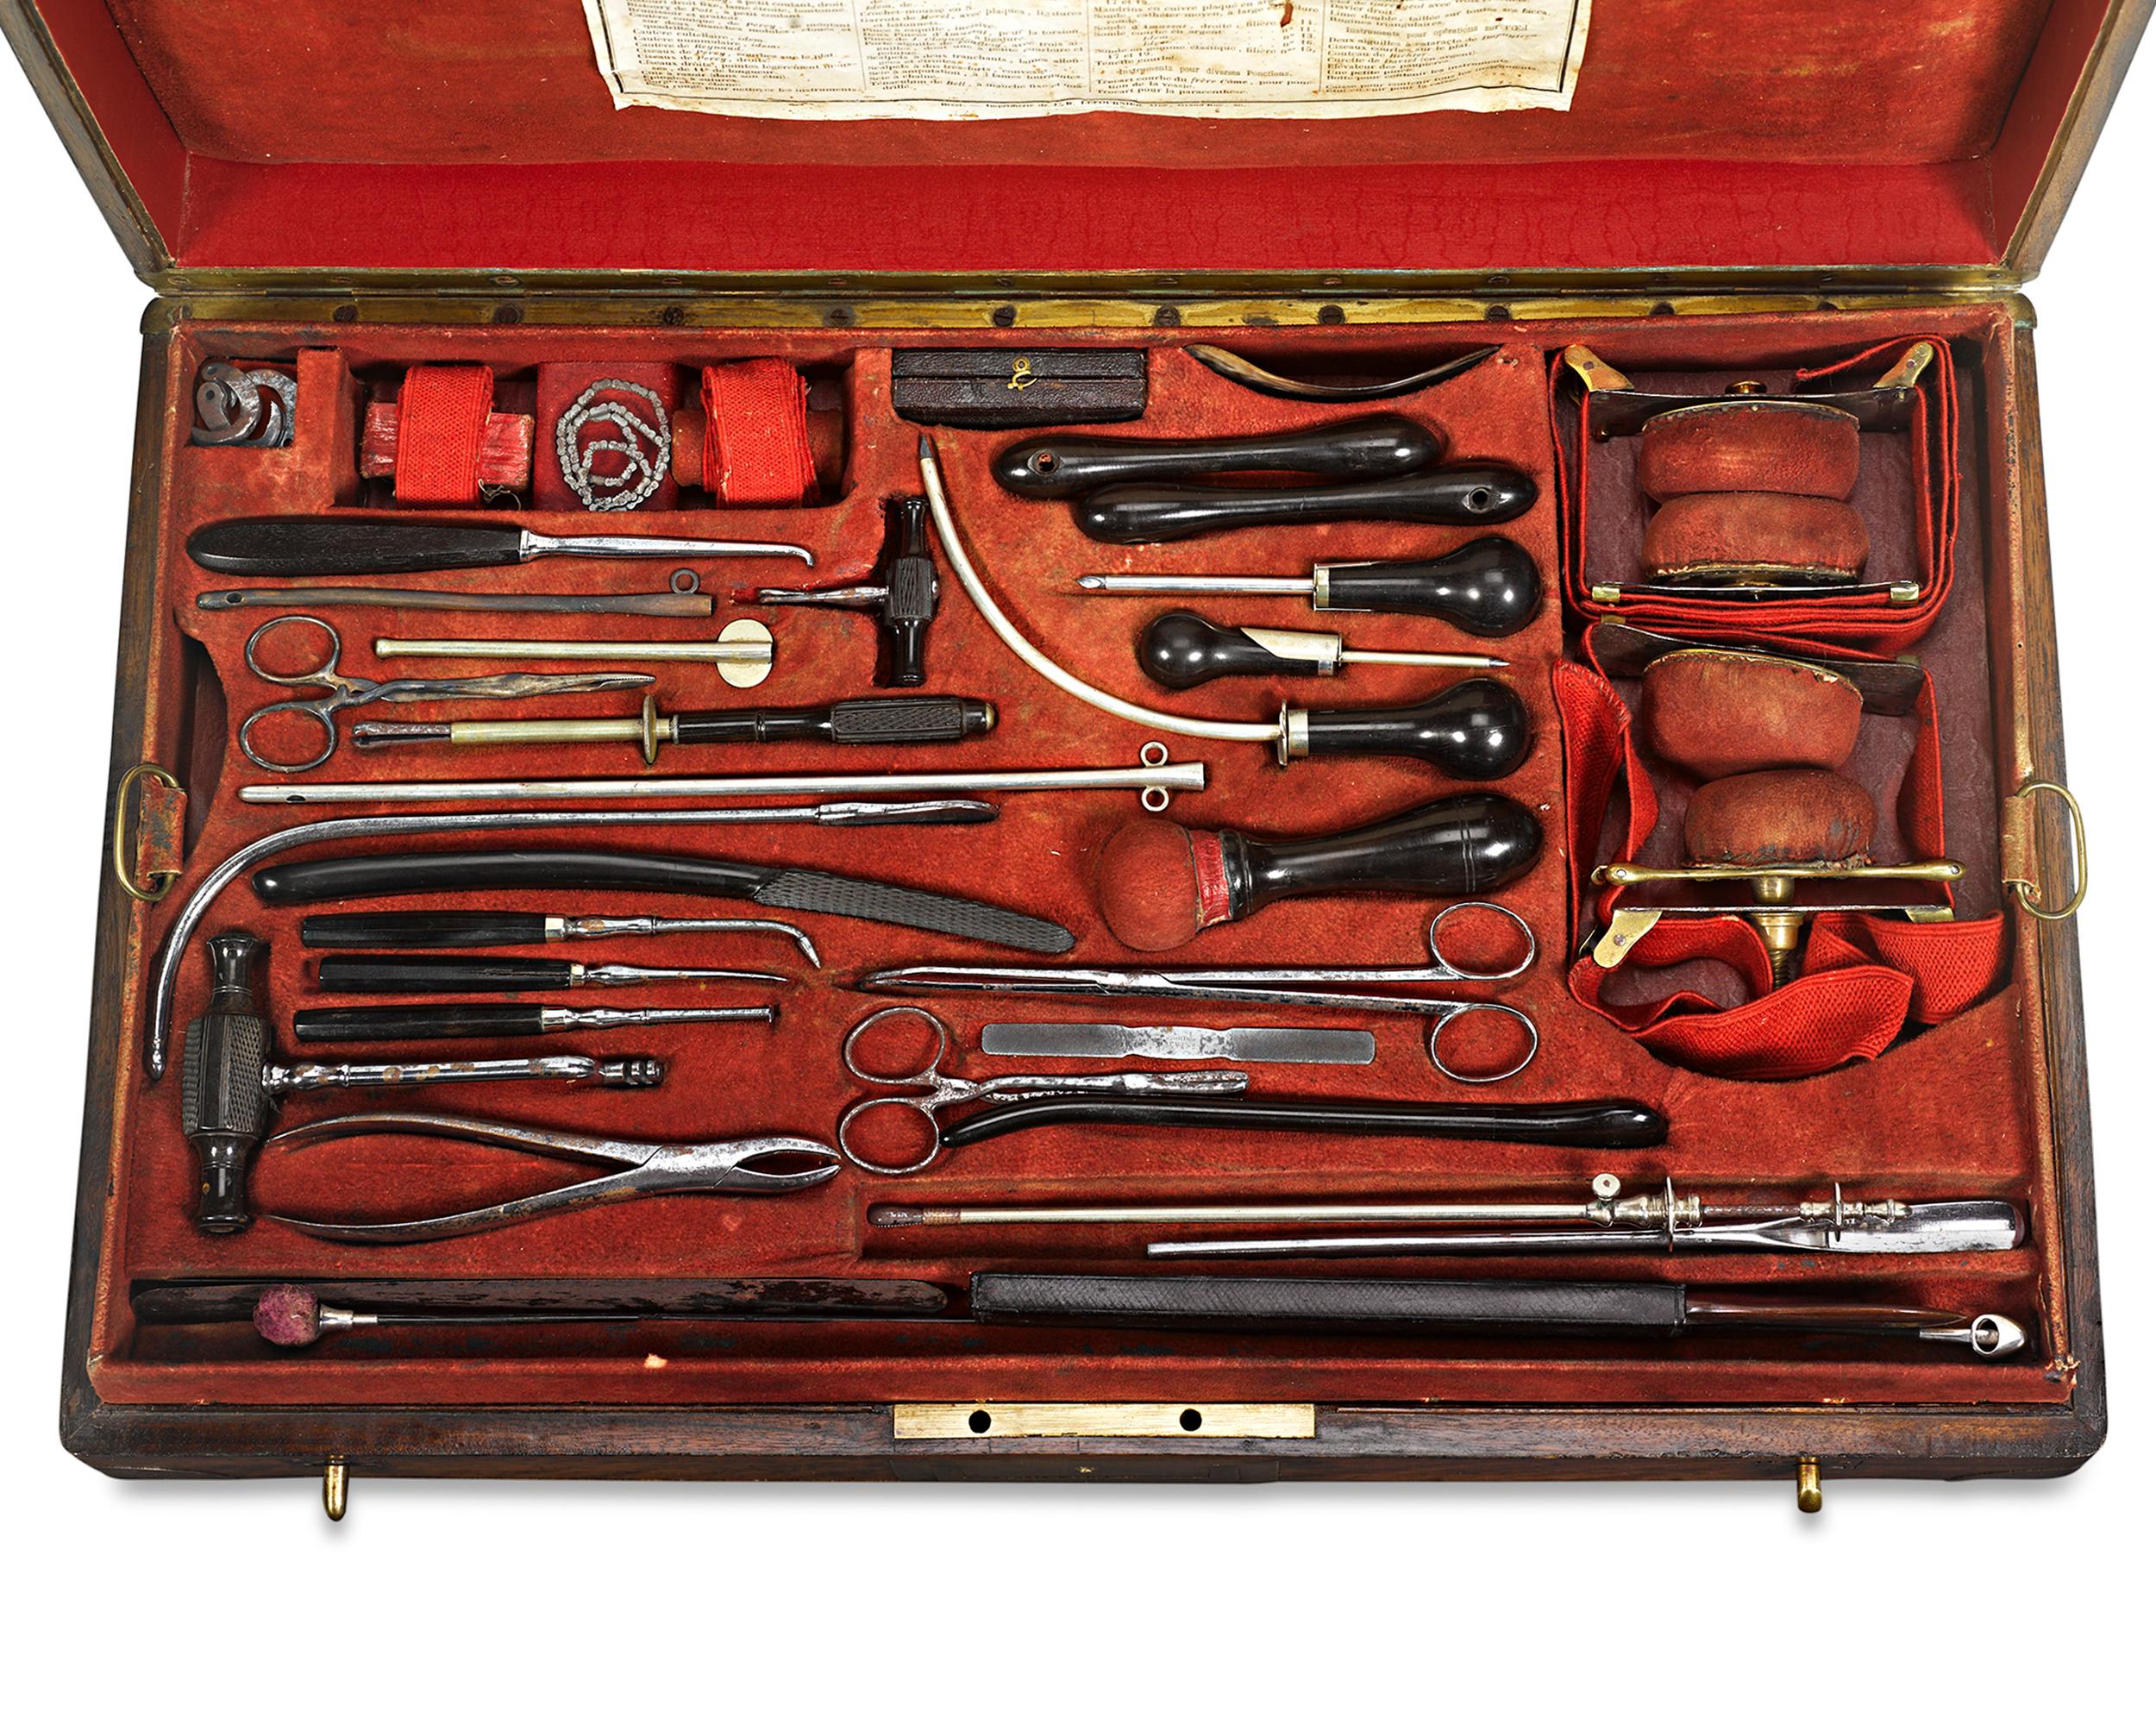 This highly important 19th-century French naval surgeon’s kit includes the instruments needed to conduct any and every known medical procedure necessary at sea. The set contains a multitude of instruments for performing a wide variety of procedures,